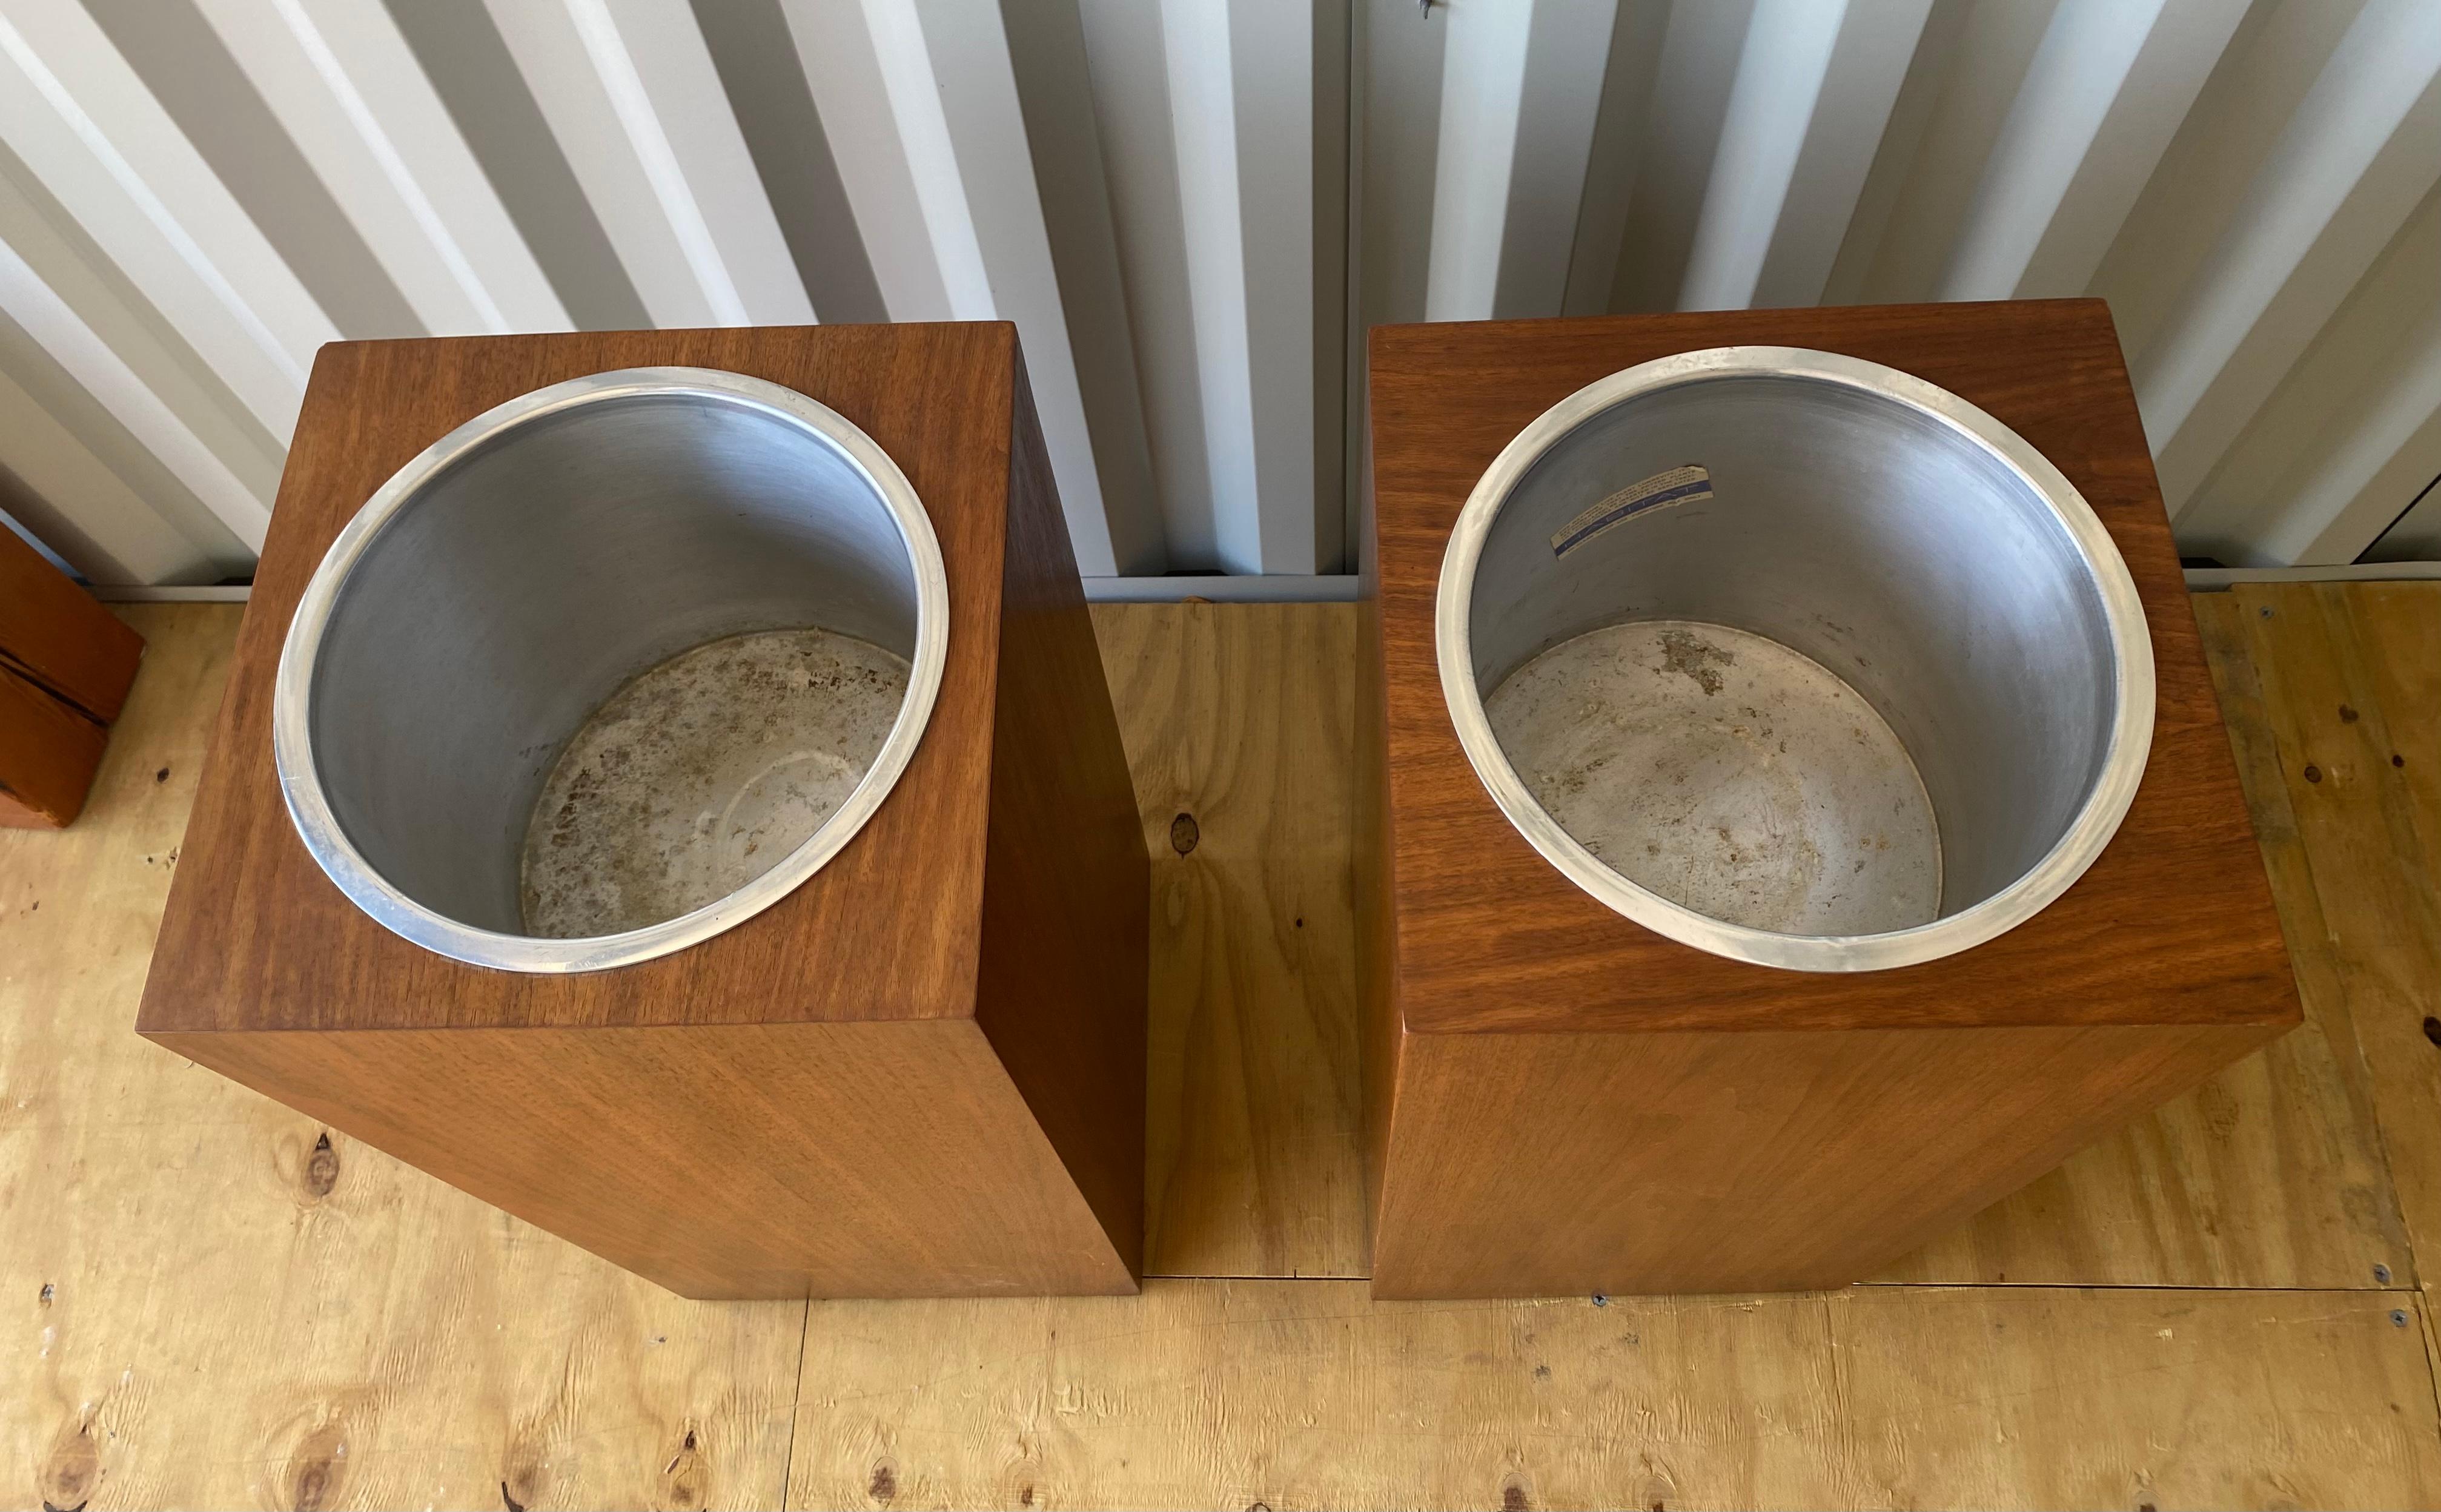 Modernist Walnut and Aluminum Architectural Planters by Habitat International,, Stunning sleek, simple, classic design,Fit seamlessly into any modern, contemporary, environment.Priced separately but would be amazing used as a pair.